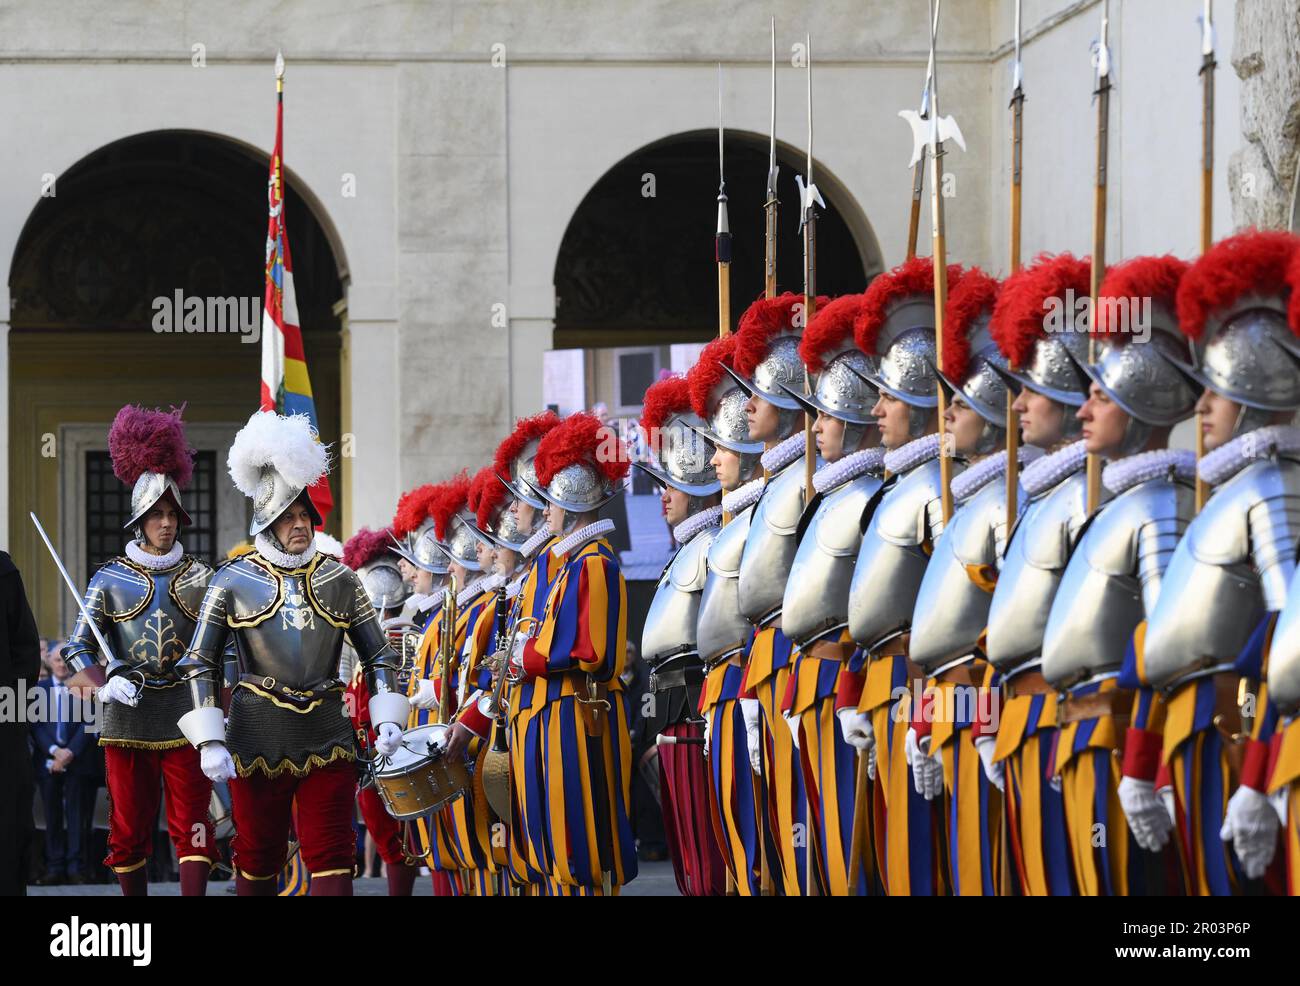 Swearing-in ceremony of the 23 new recruits of the Swiss Guard at the Vatican on May 6, 2023. This traditional ceremony takes place every year on May 6. The day marks the anniversary of the heroic sacrifice of 147 Swiss guards who died during the Sack of Rome in 1527 as they protected Pope Clement VII. Photo: Vatican Media (EV) /ABACAPRESS.COM Credit: Abaca Press/Alamy Live News Stock Photo